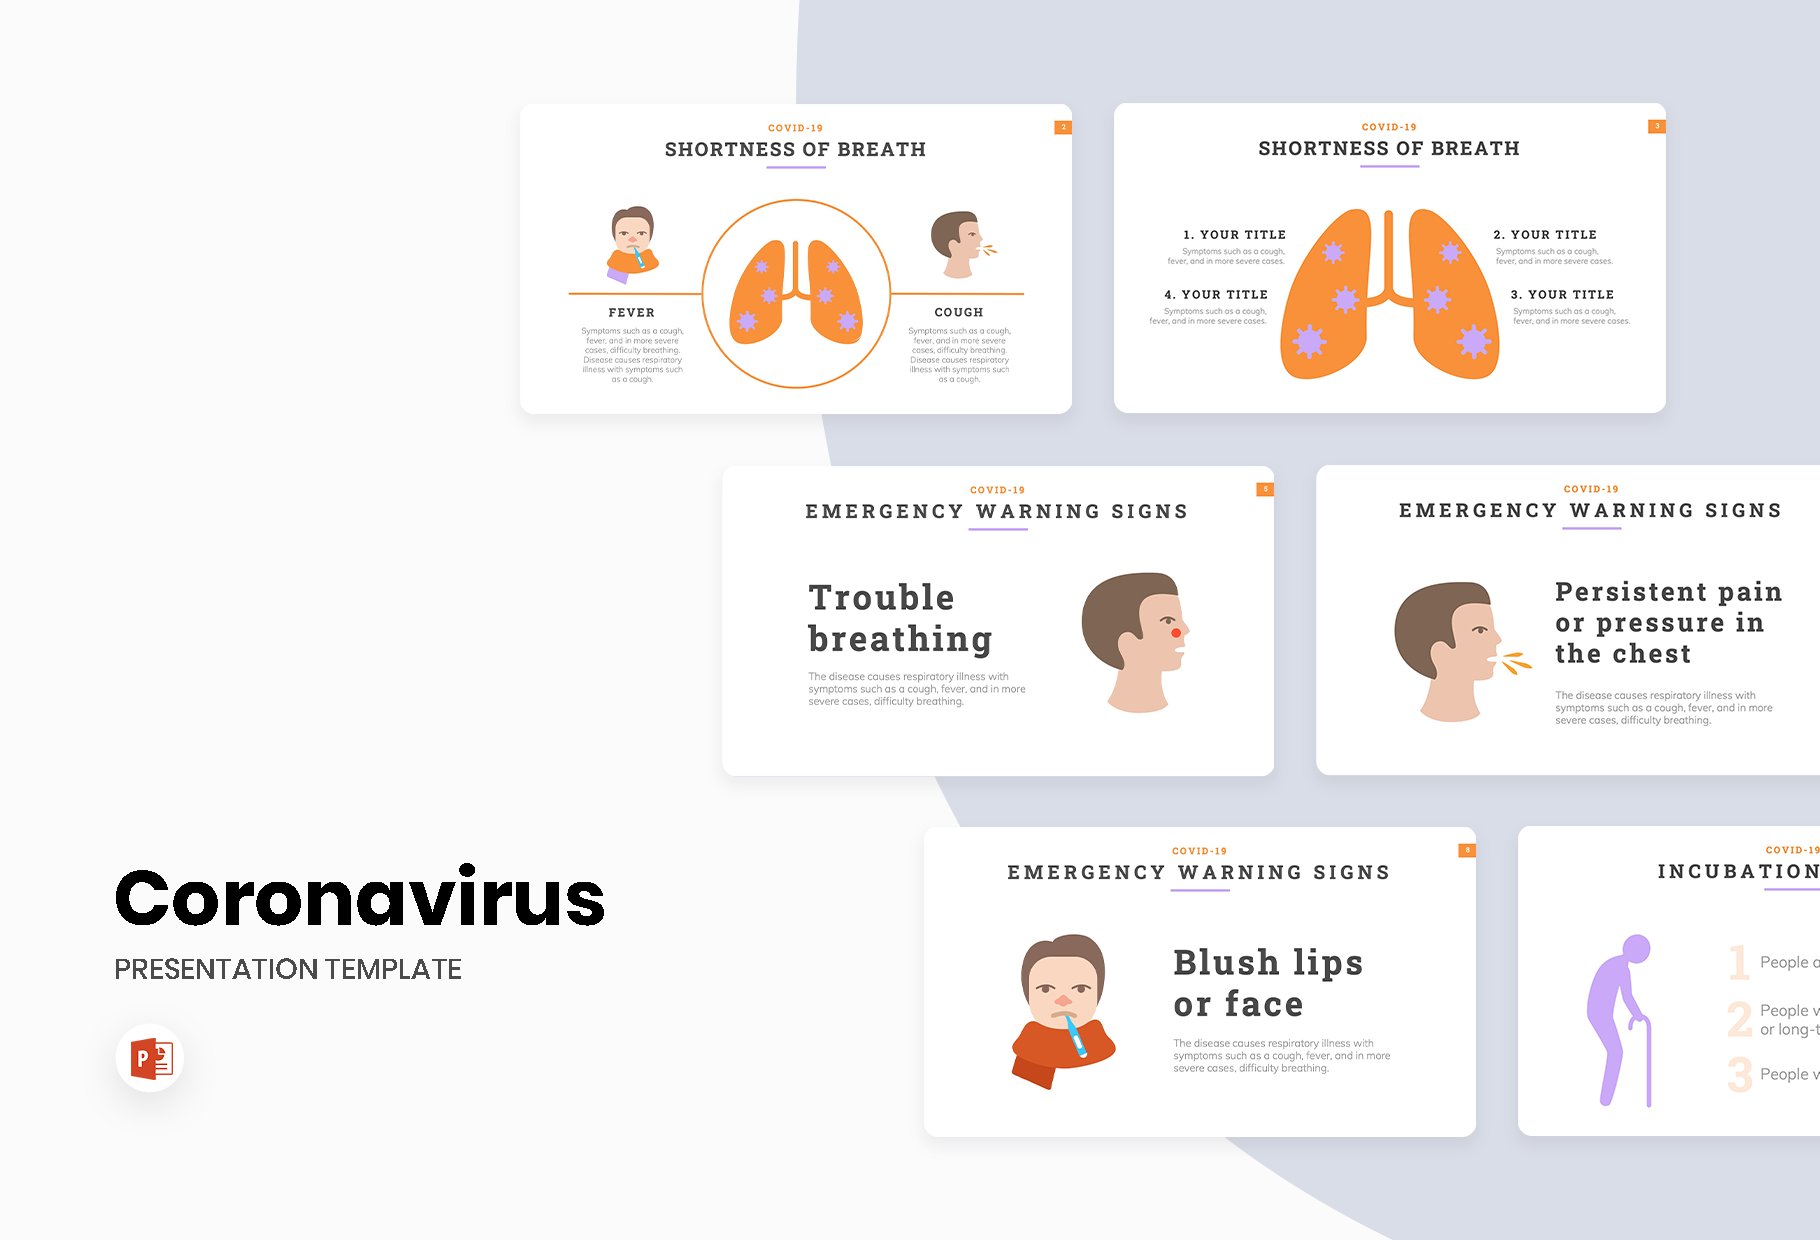 Coronavirus is an actually and interesting template.